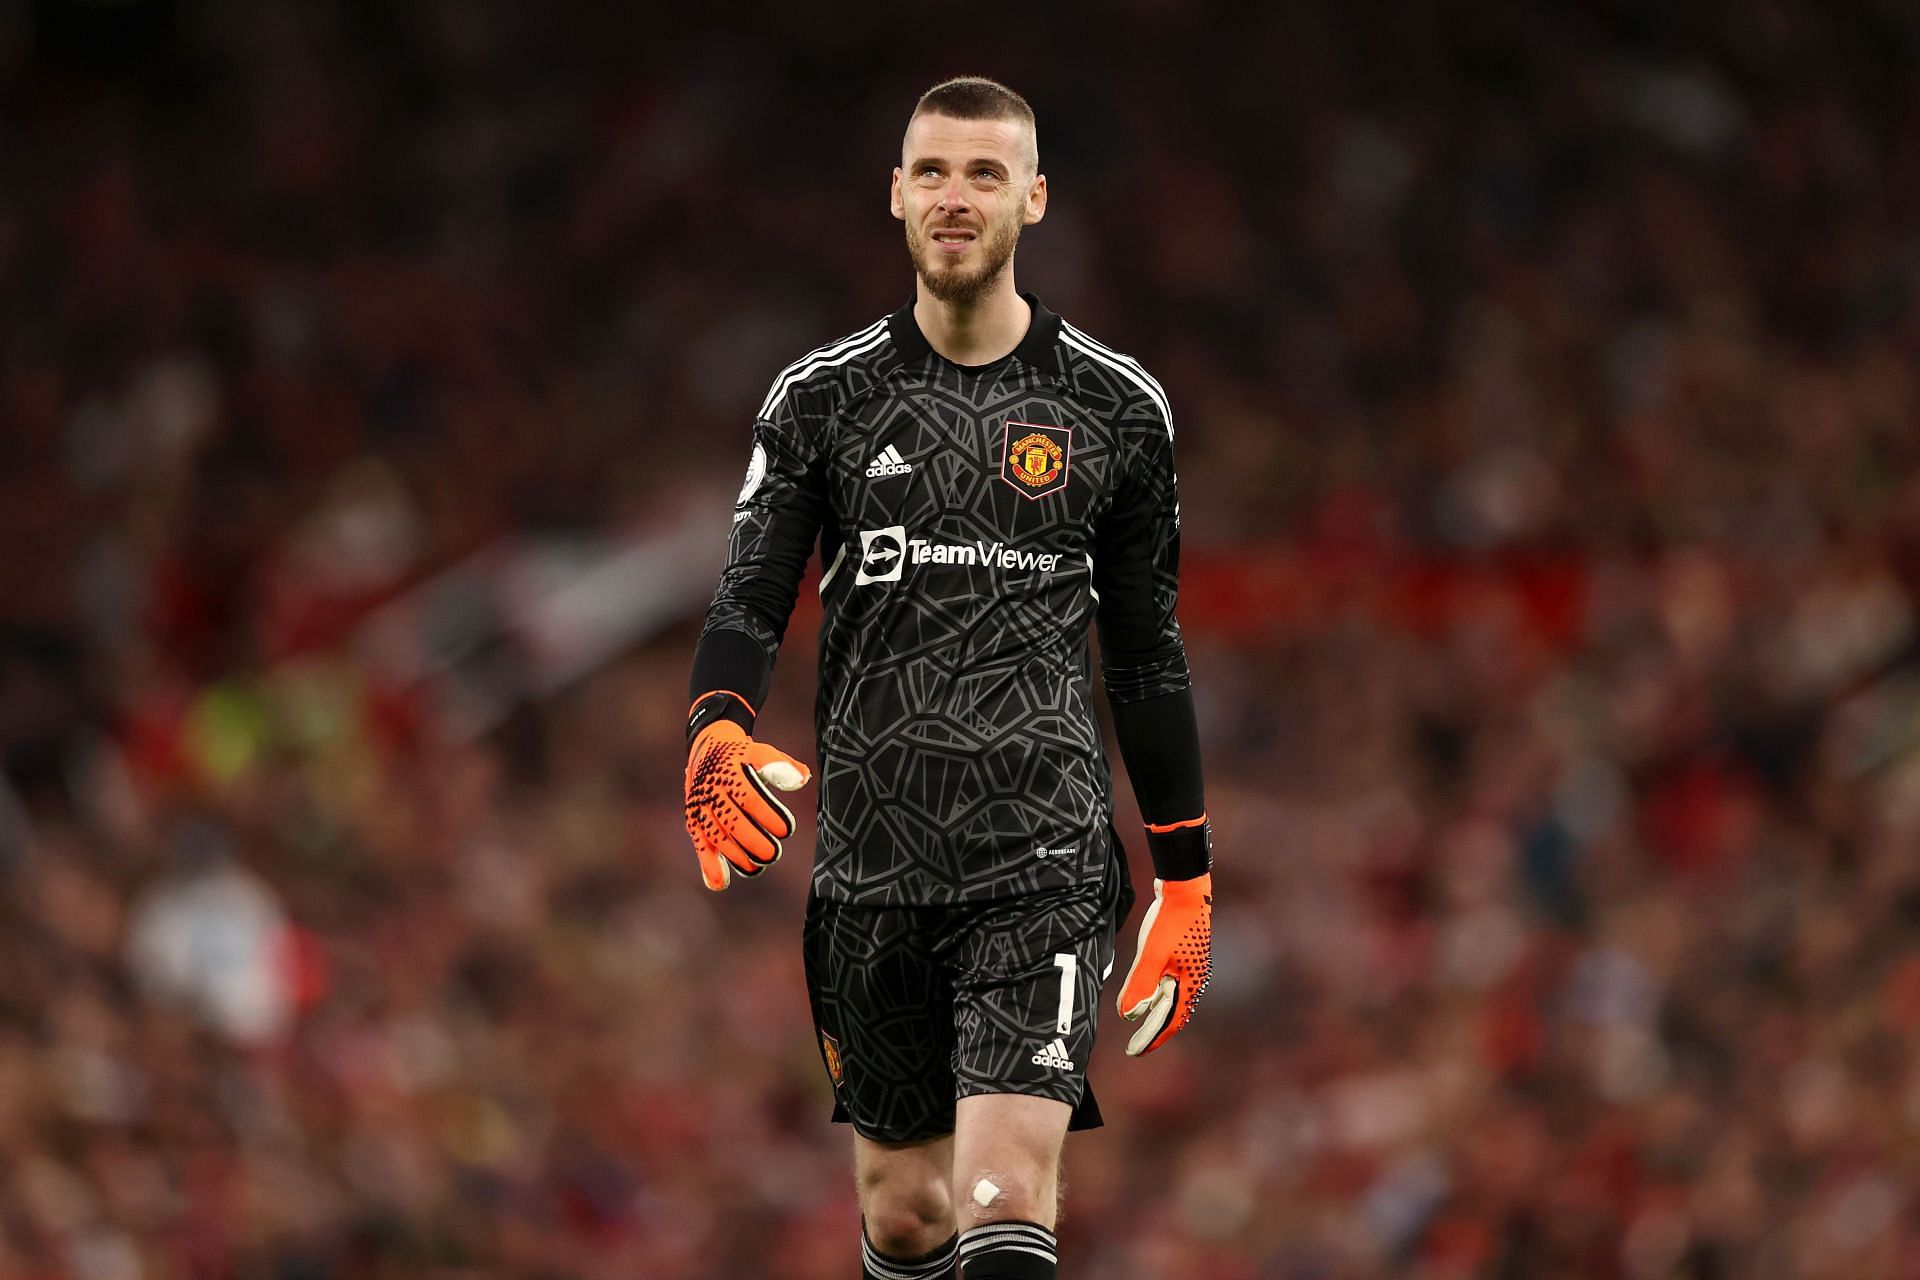 David de Gea is without a club right now.